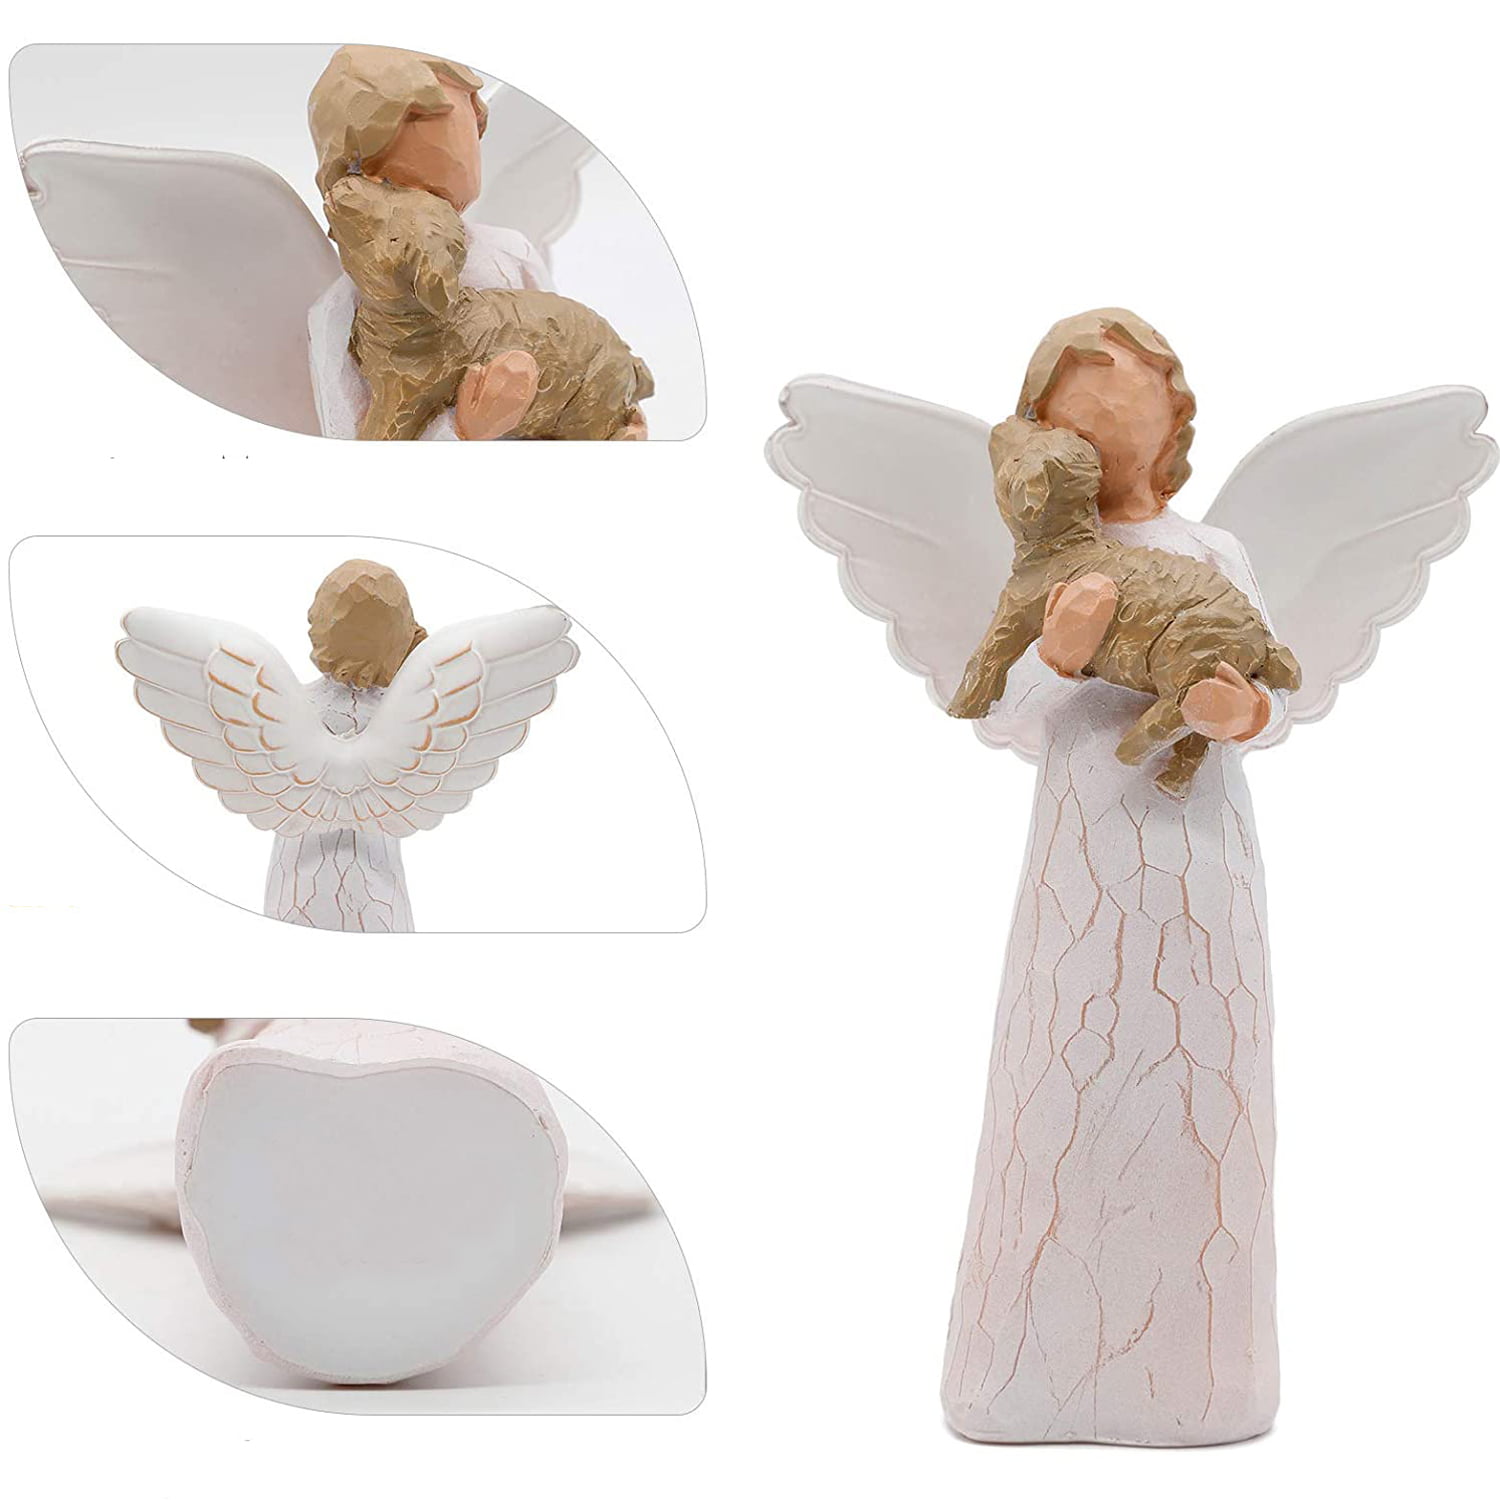 BEARAE Angel of Friendship Dog Memorial Gifts Candle Holder Pet Loss Candle Gifts Sculpted Hand-Painted Figure Sympathy Angel Gift Dog Angel Figurines Decor for Grieving Pet Owners and Dog Lovers 